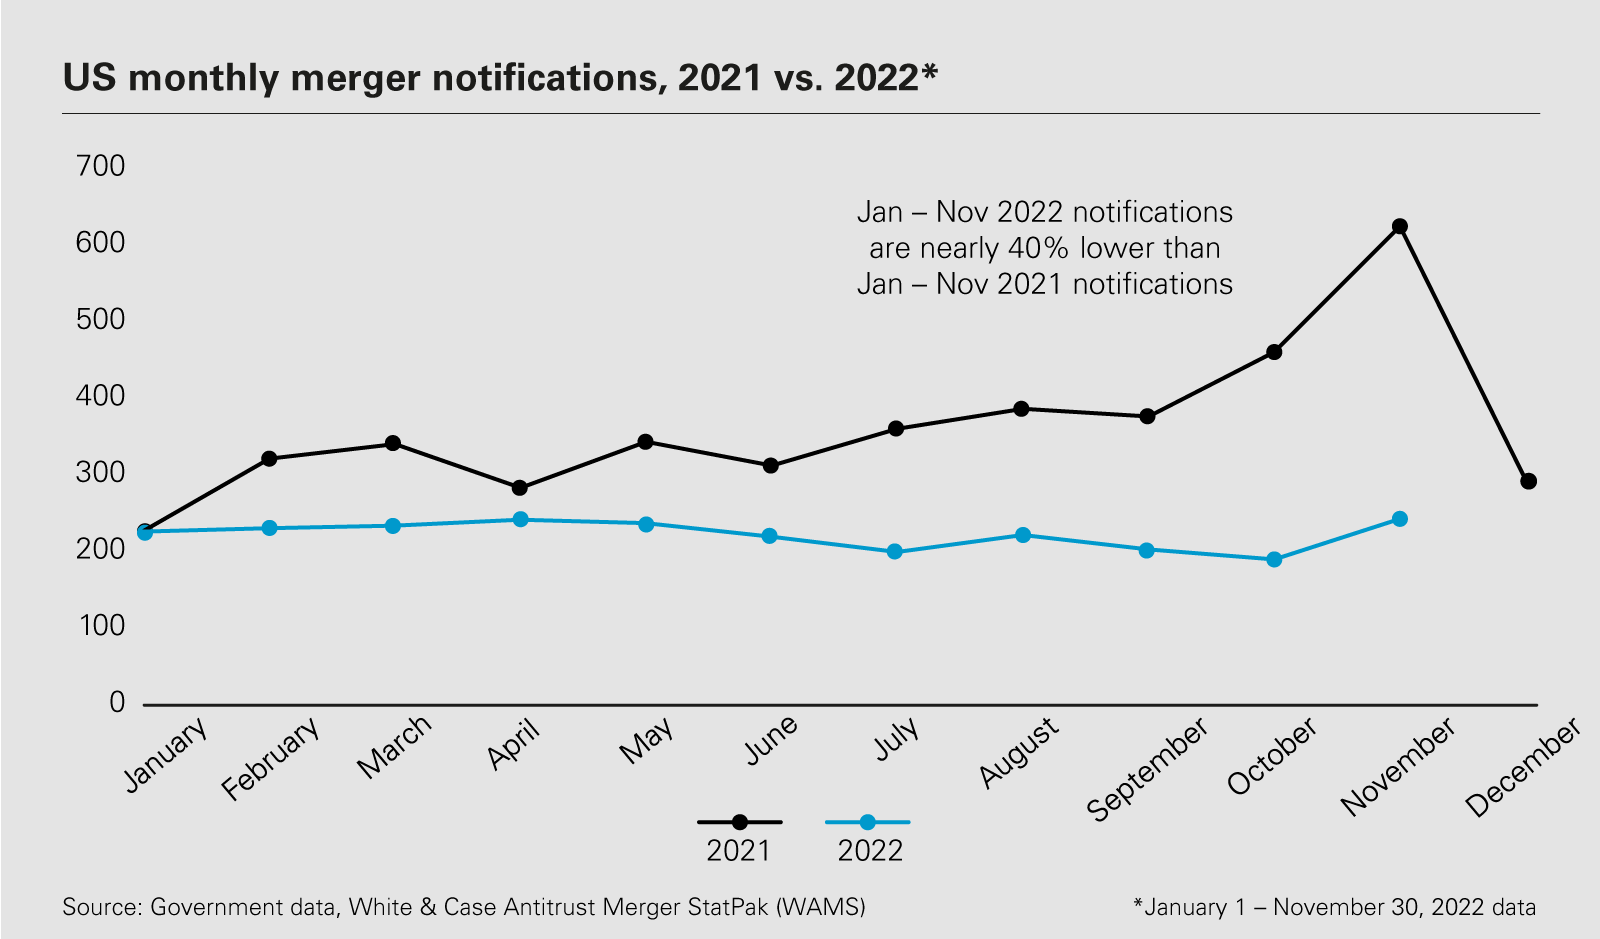 US monthly merger notifications, 2021 vs. 2022*